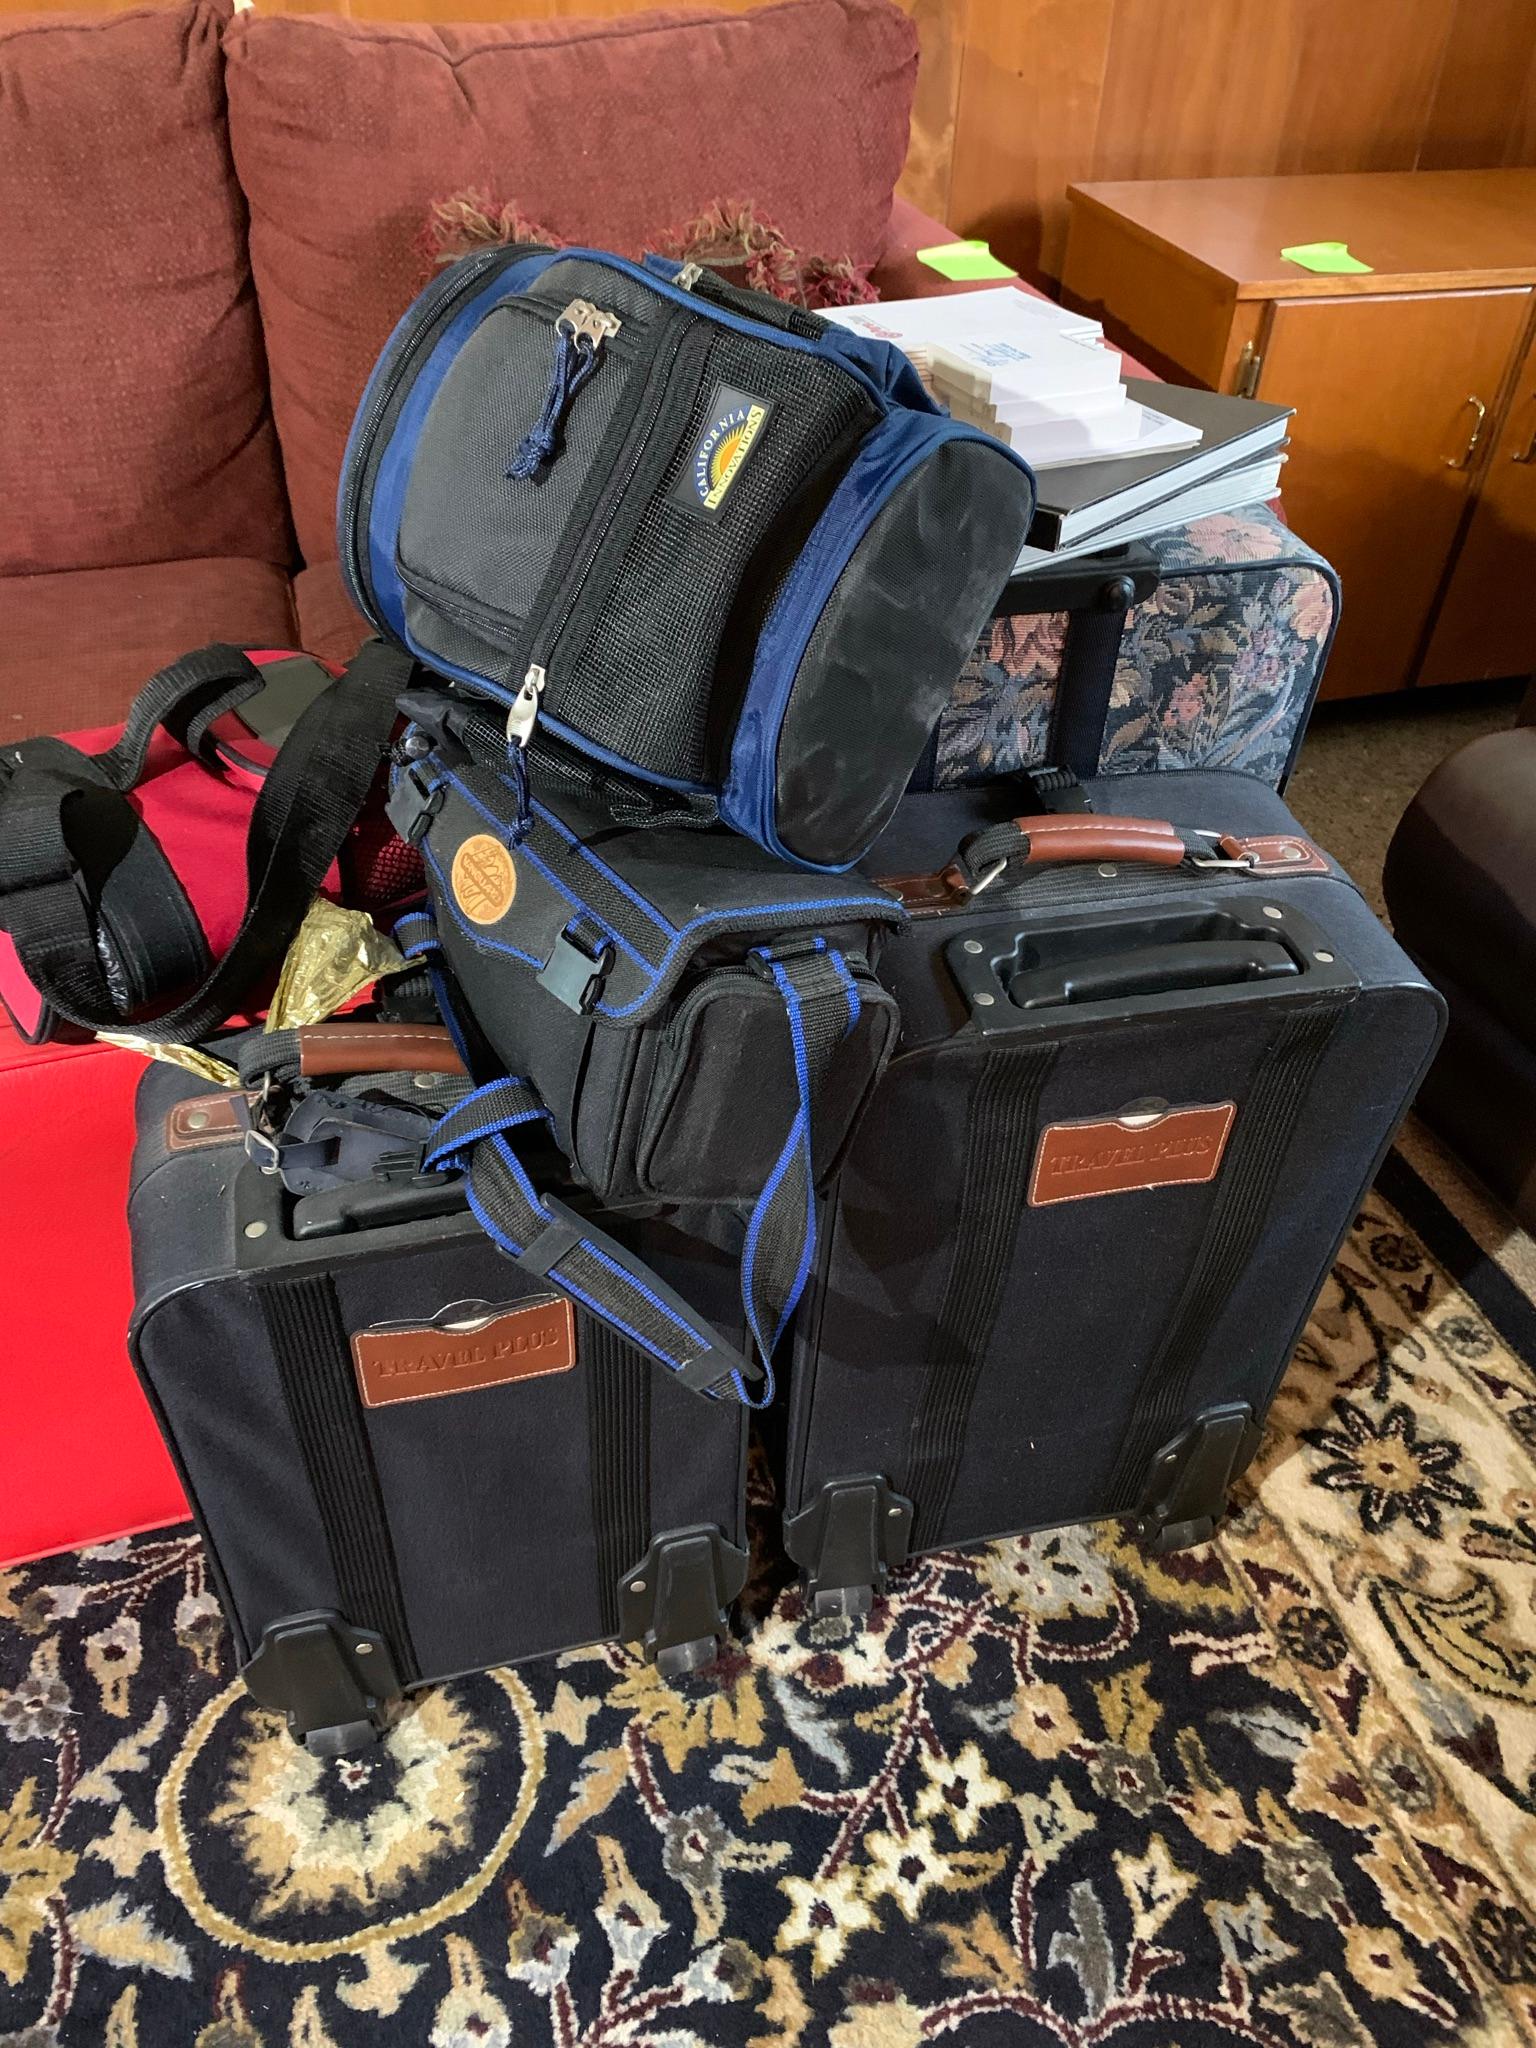 Group of Luggage, Shoes & Books